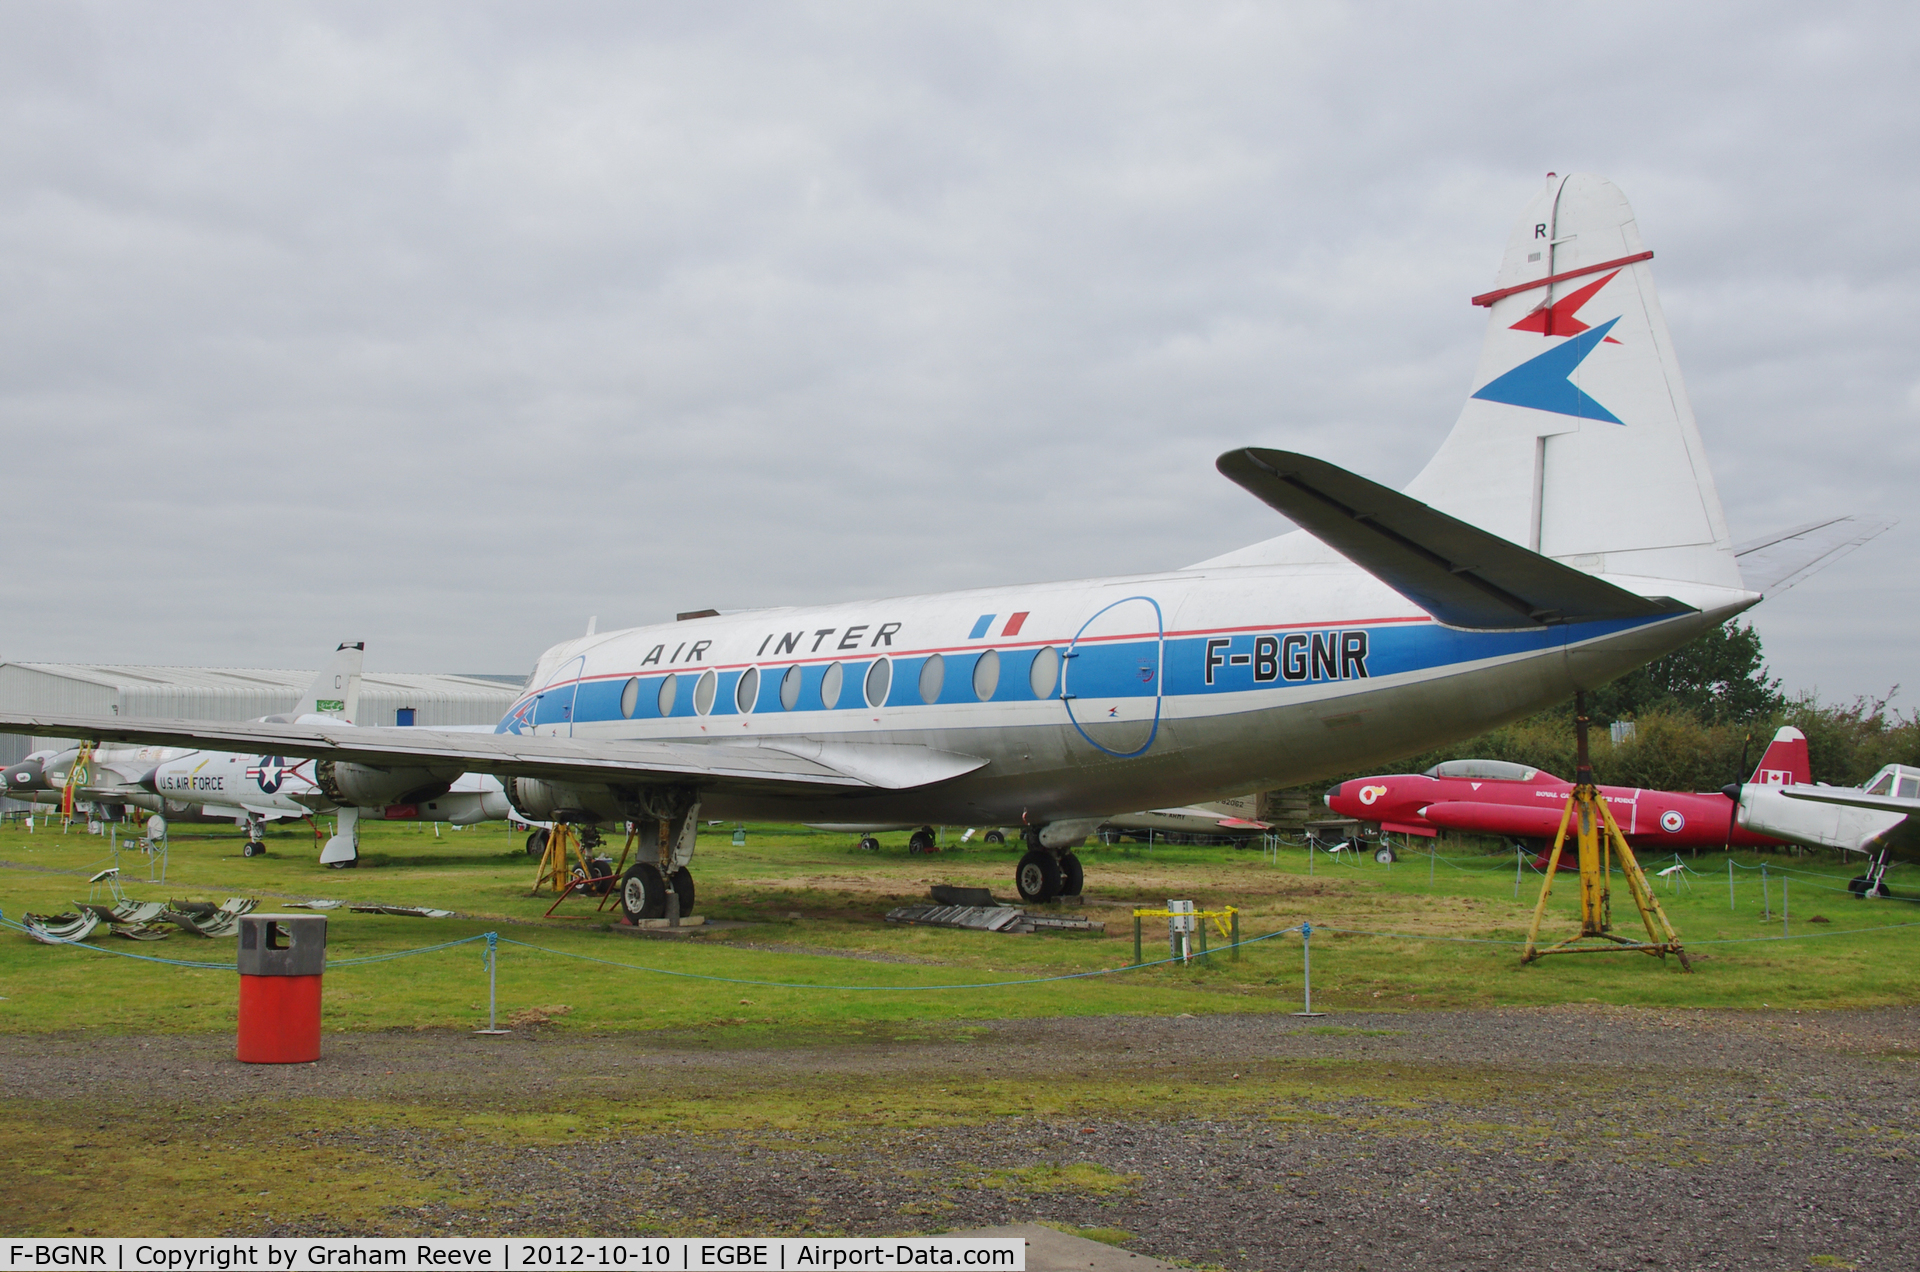 F-BGNR, 1954 Vickers Viscount 708 C/N 35, Preserved at the Midland Air Museum.